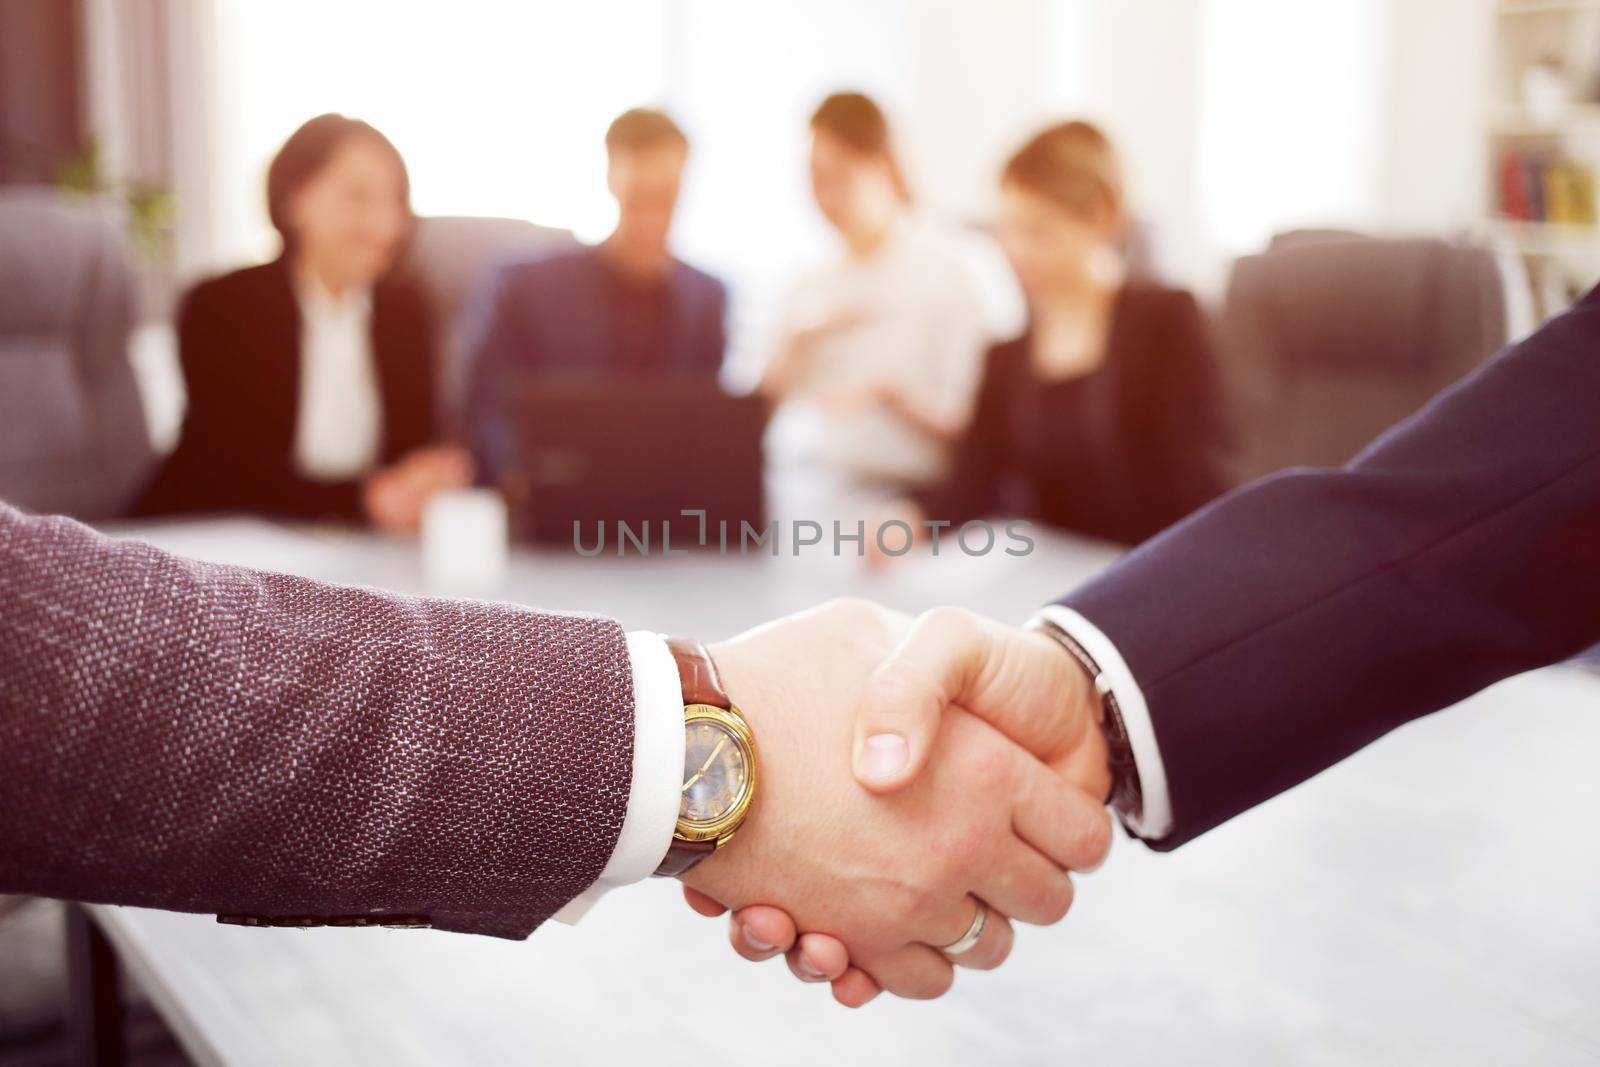 Business people shaking hands finishing a meeting in the background of their work team by selinsmo